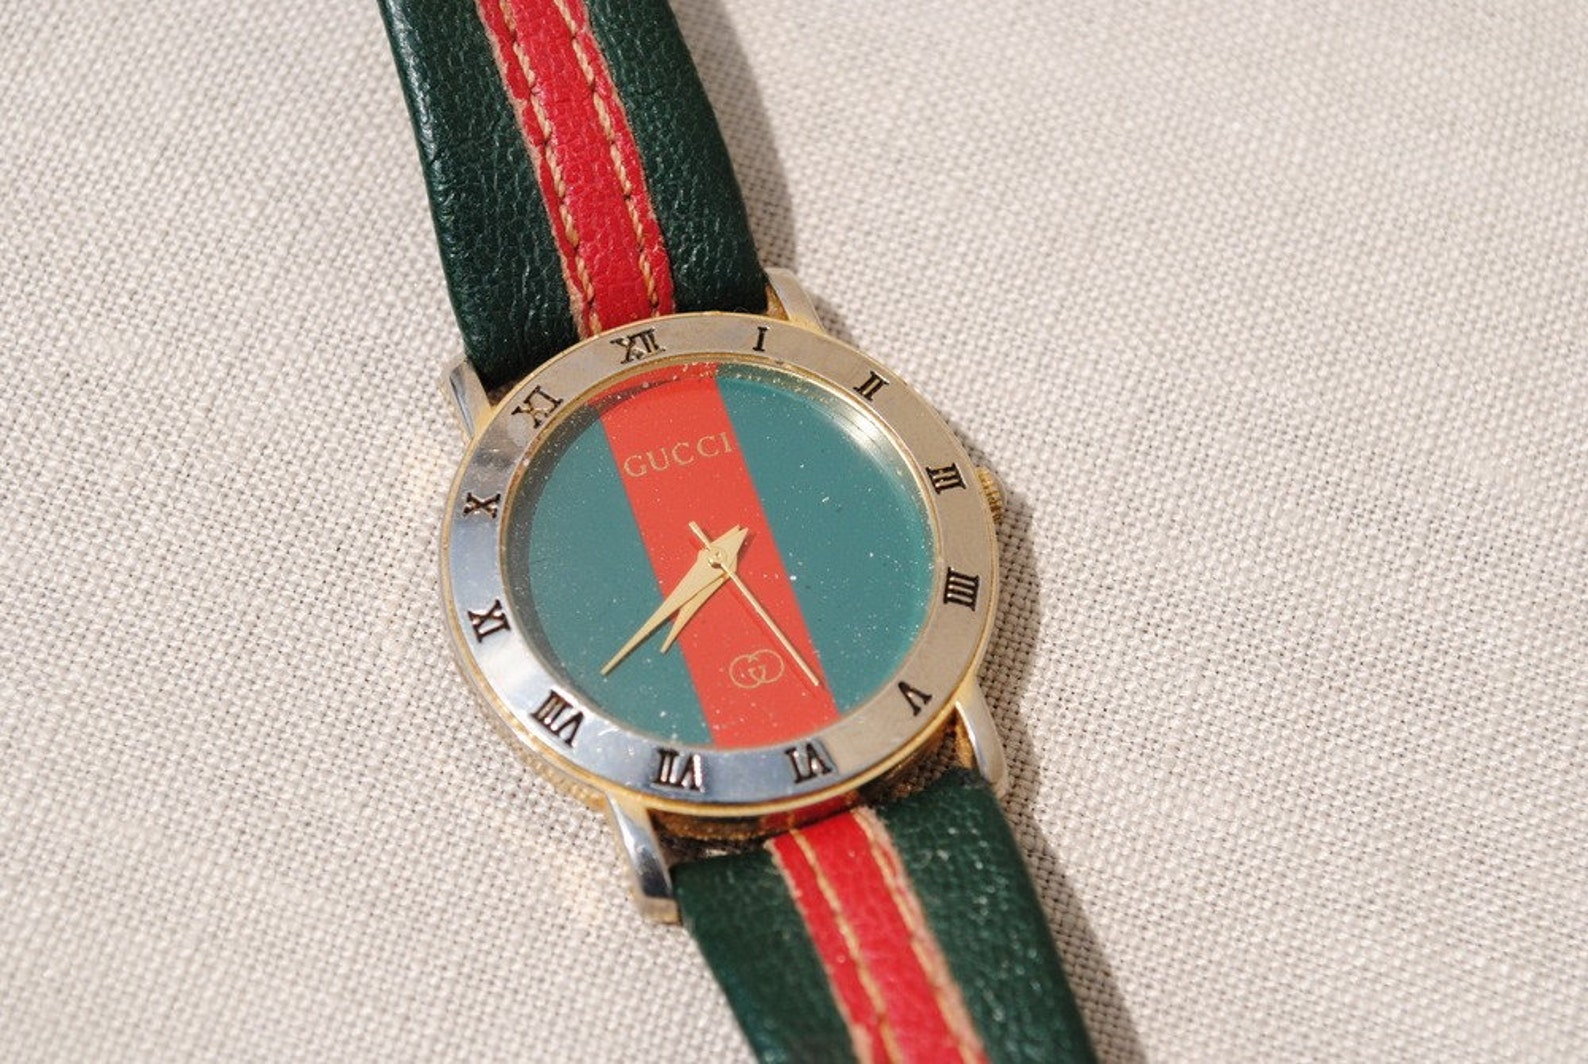 Vintage GUCCI Green and Red Watch | Etsy